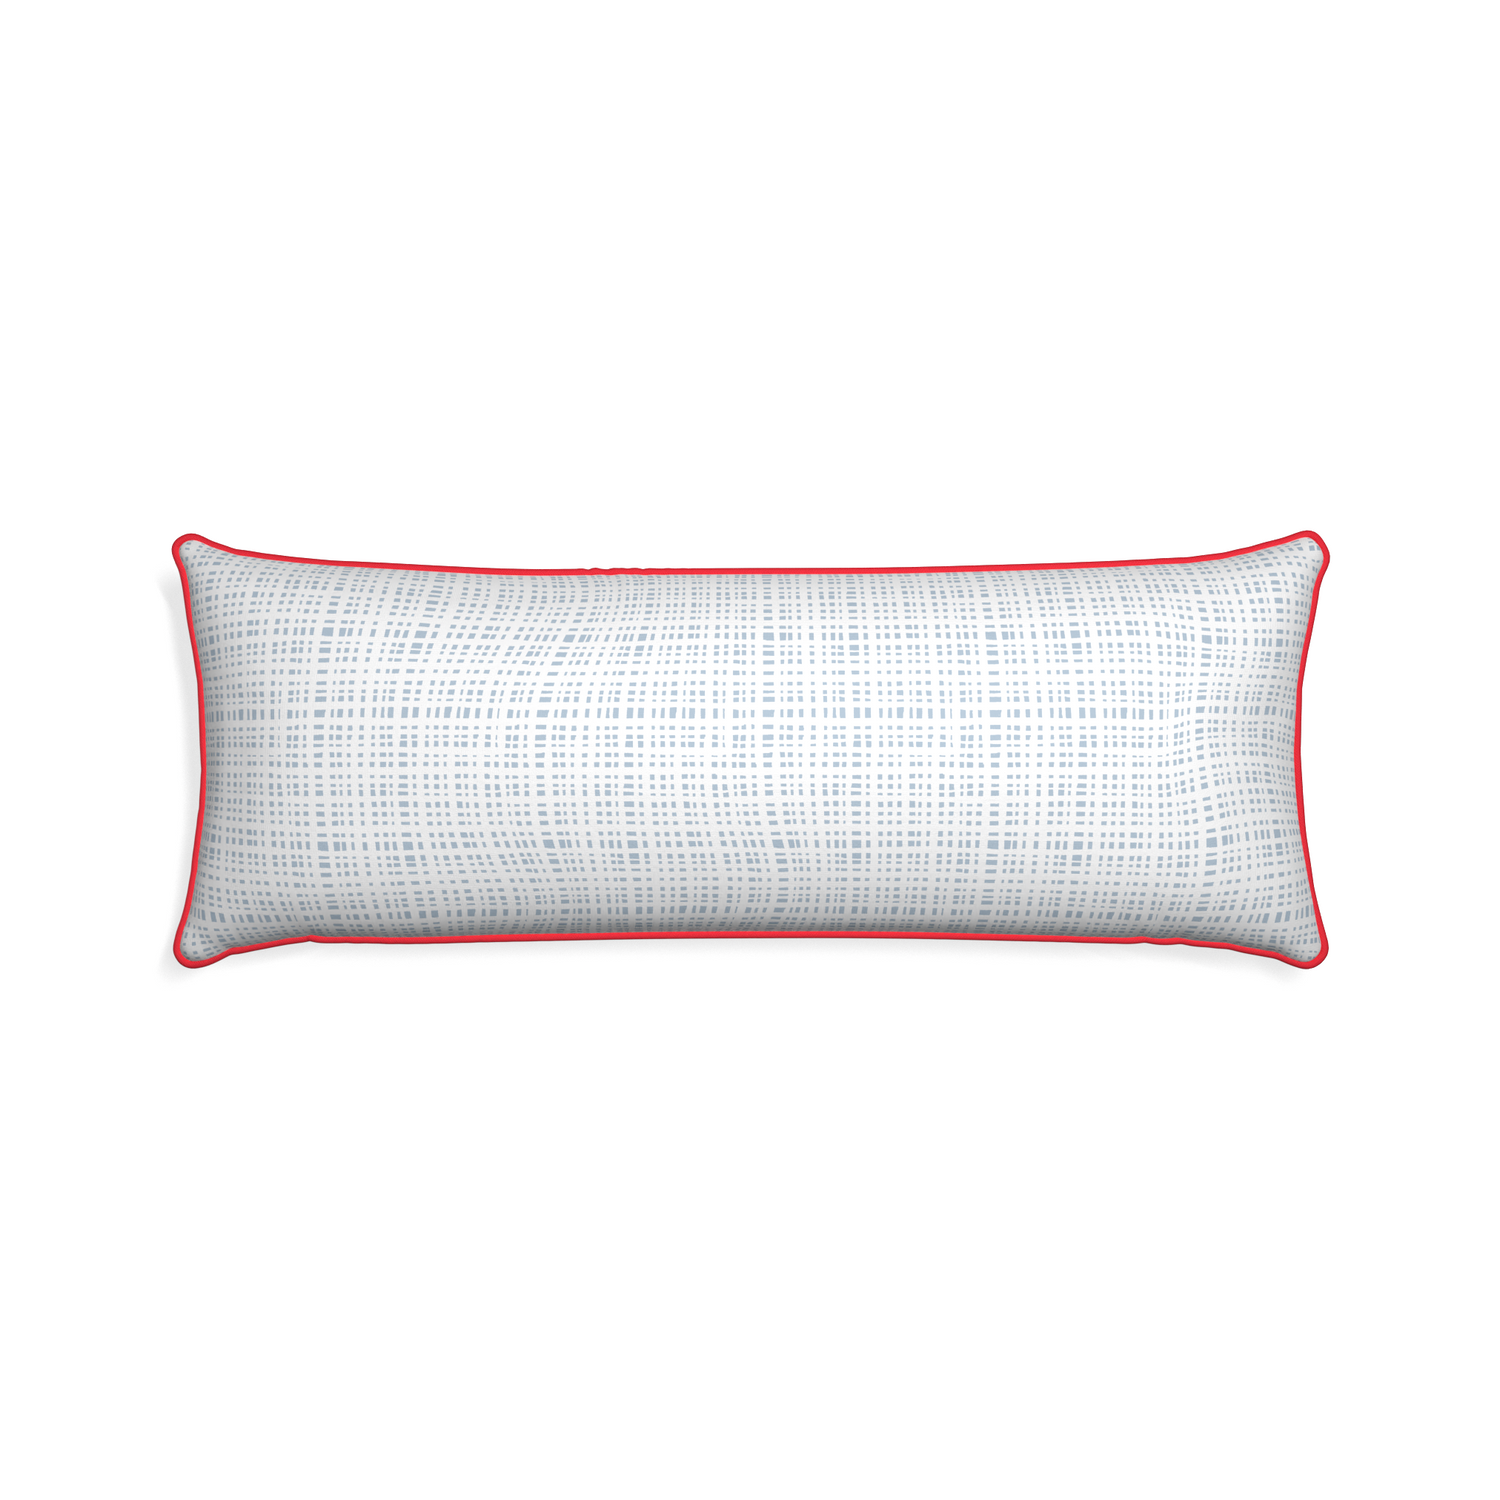 Xl-lumbar ginger sky custom plaid sky bluepillow with cherry piping on white background